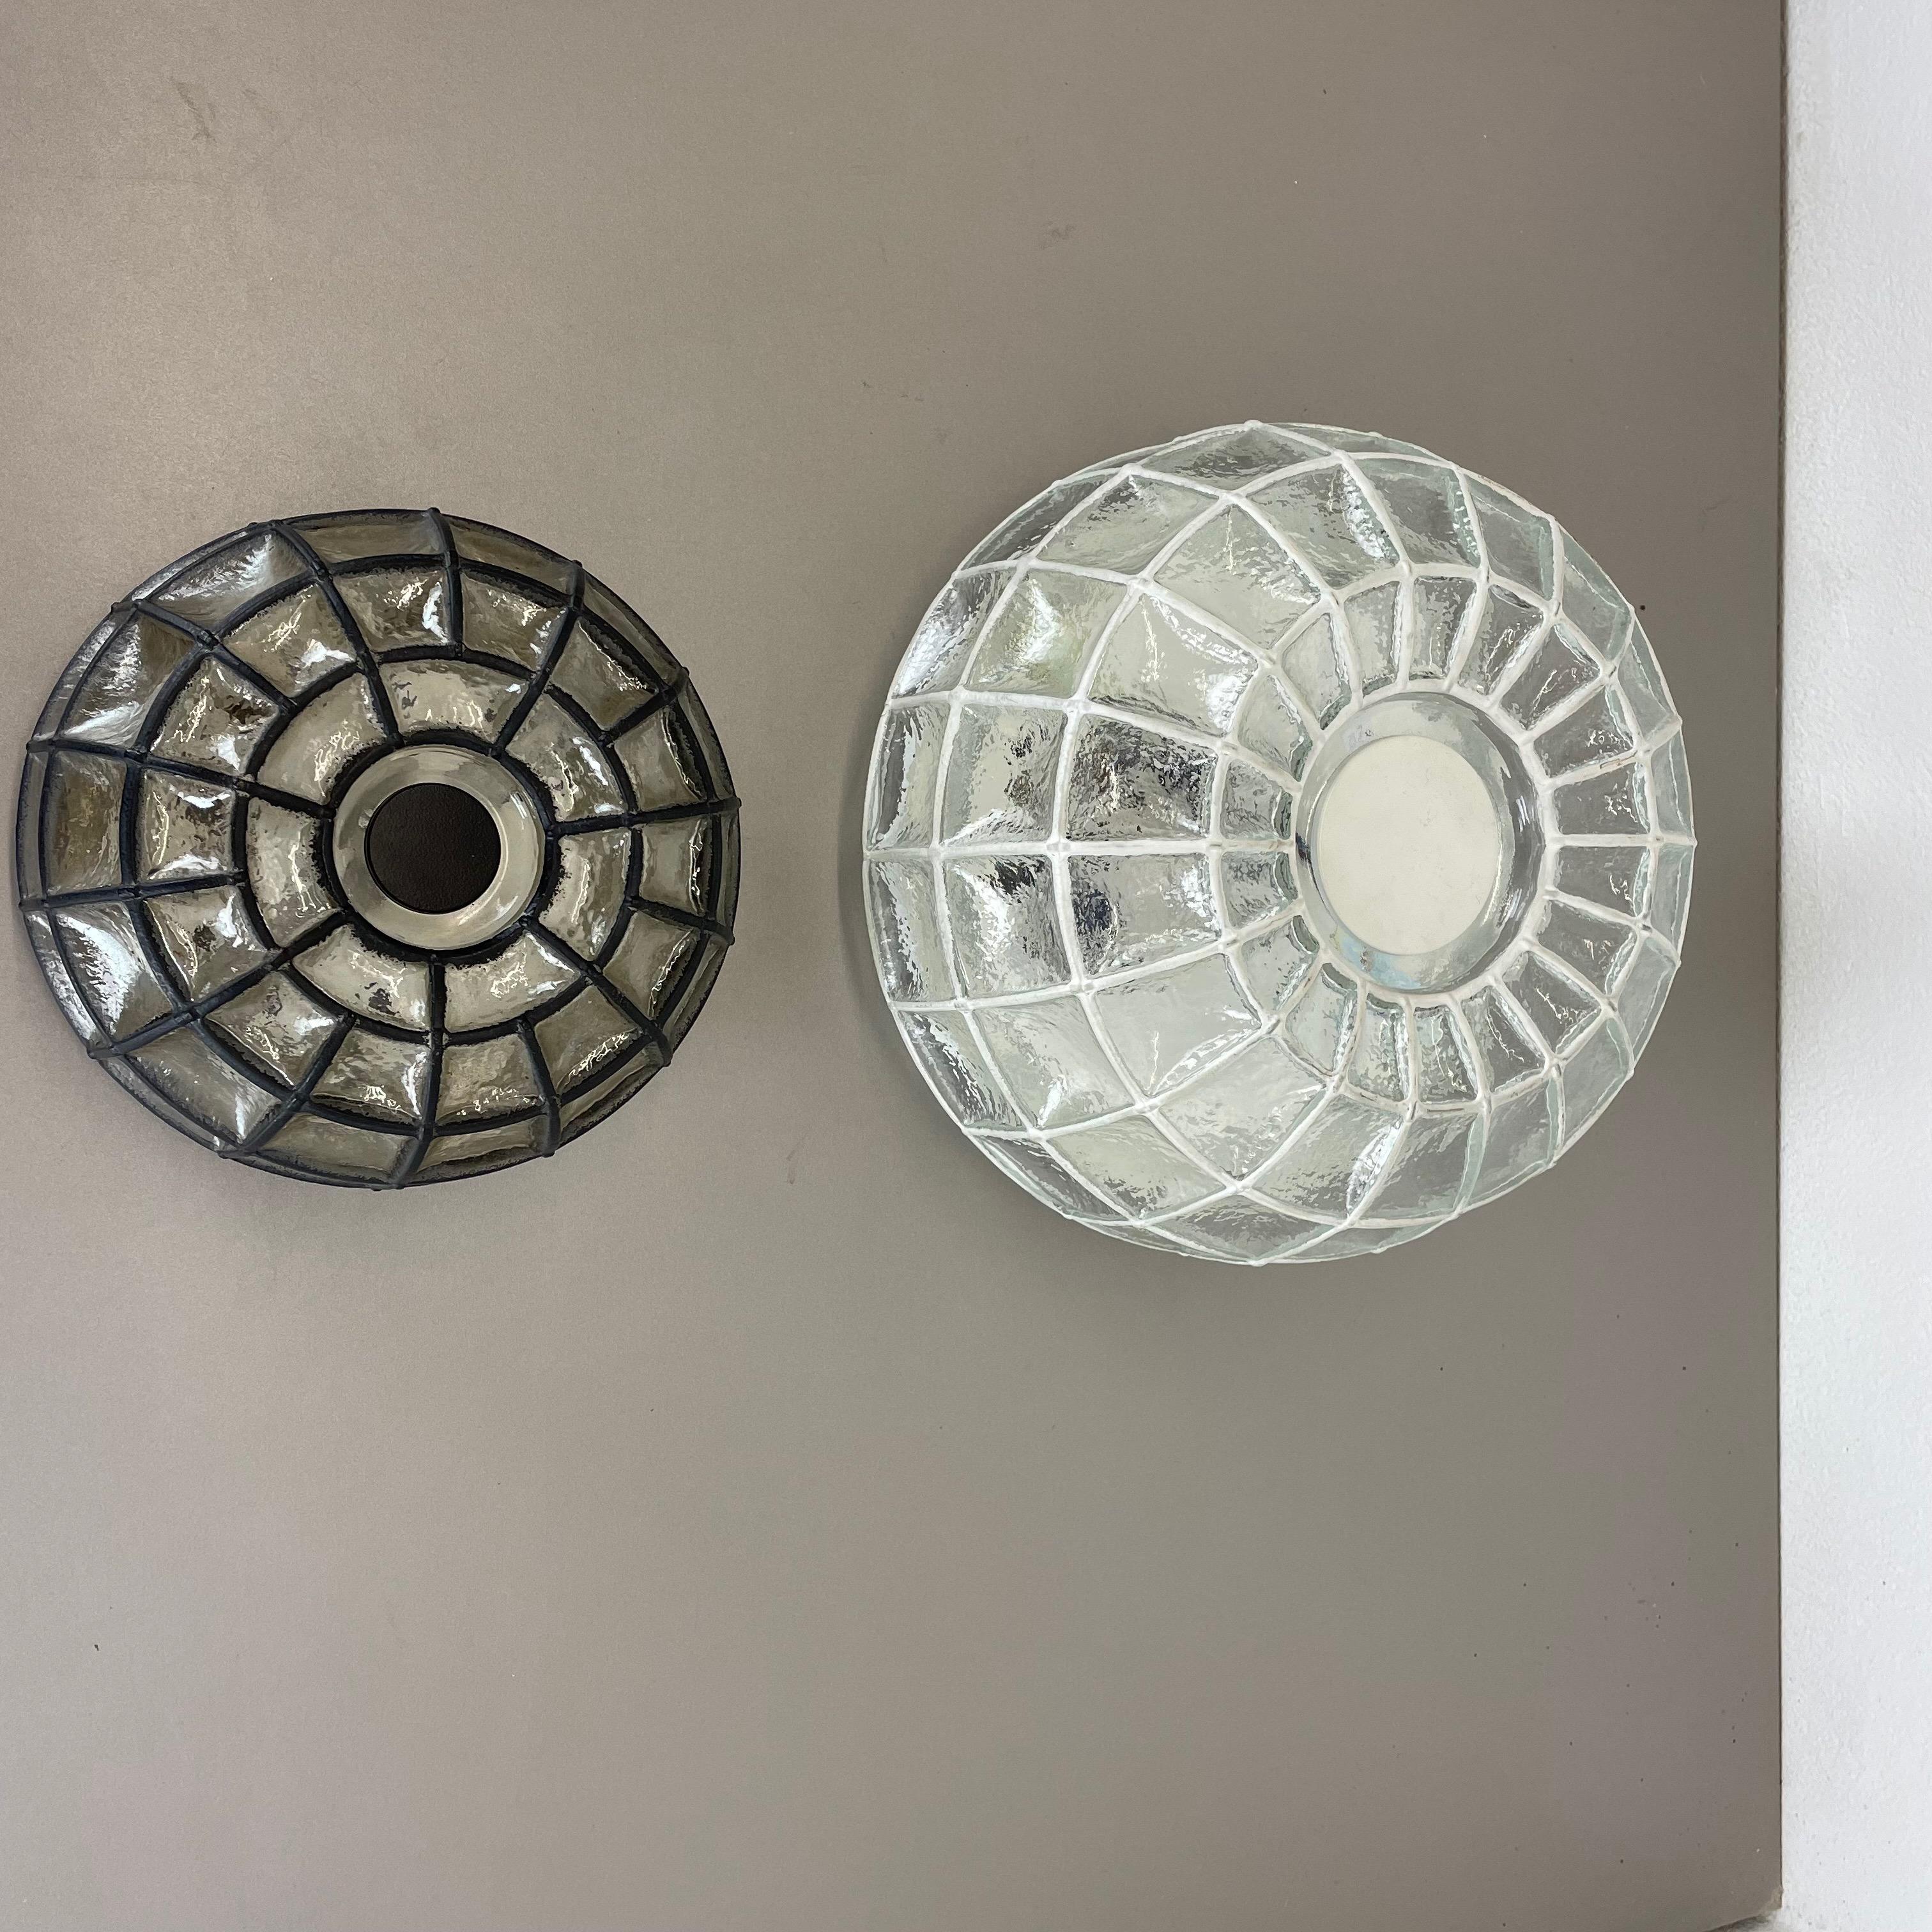 Article:

set of 2 wall light, black and white


Producer:

Glashütte Limburg, Germany



Origin:

Germany



Age:

1970s



Original 1970s modernist German wall Light set made of high quality glass with black rings and white